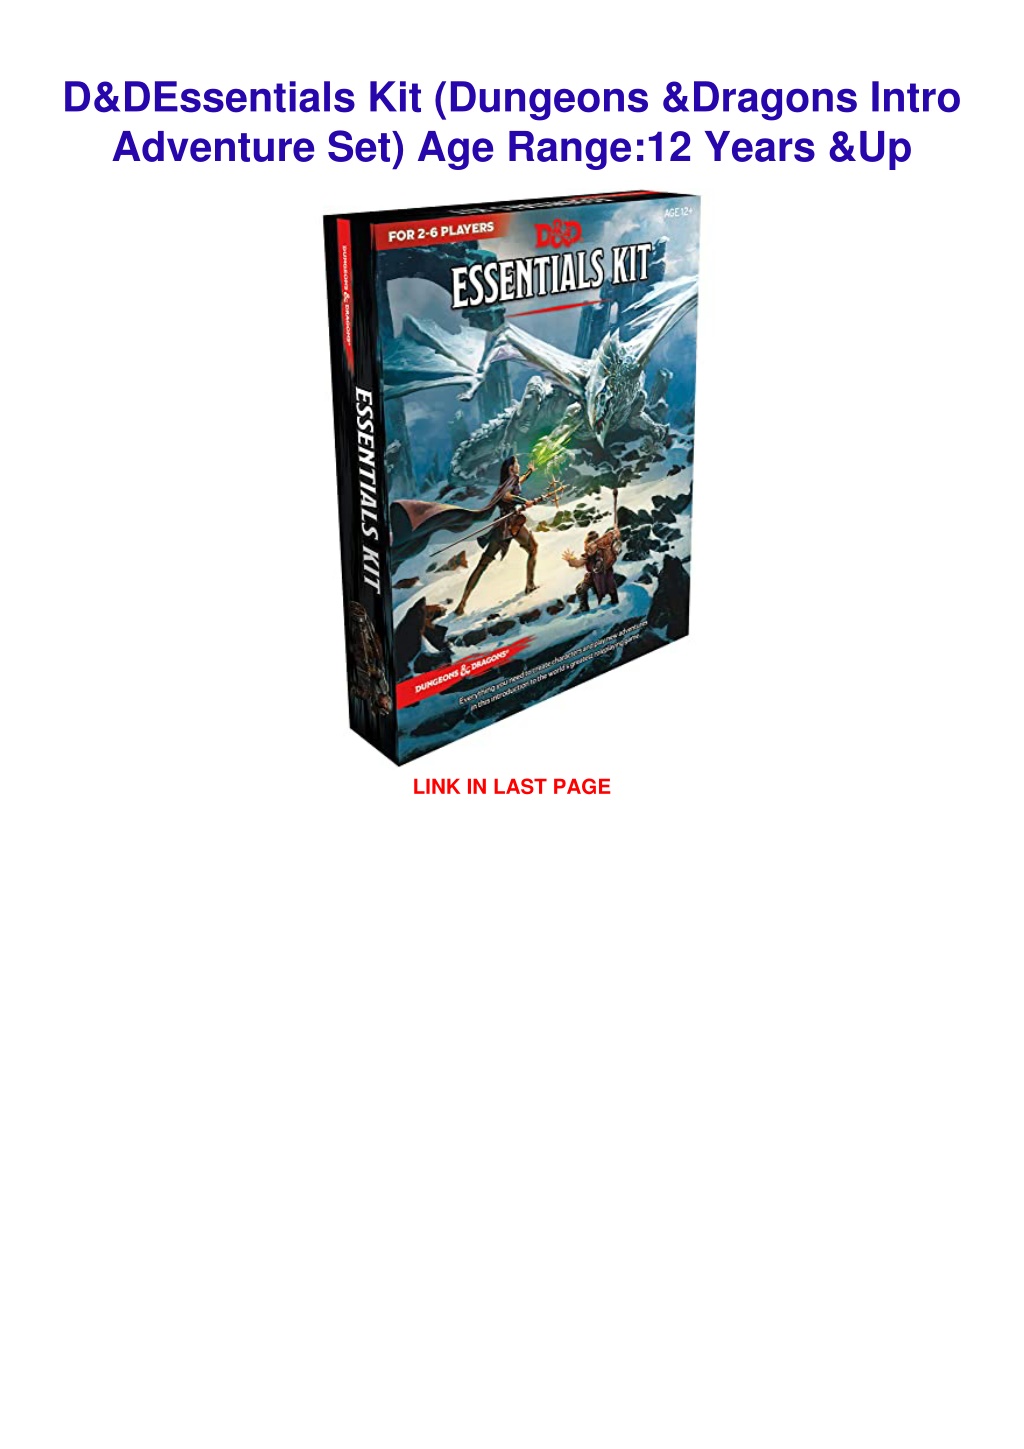 D&D Essentials Kit (Dungeons & Dragons Intro Adventure Set) Age Range:12  Years & Up